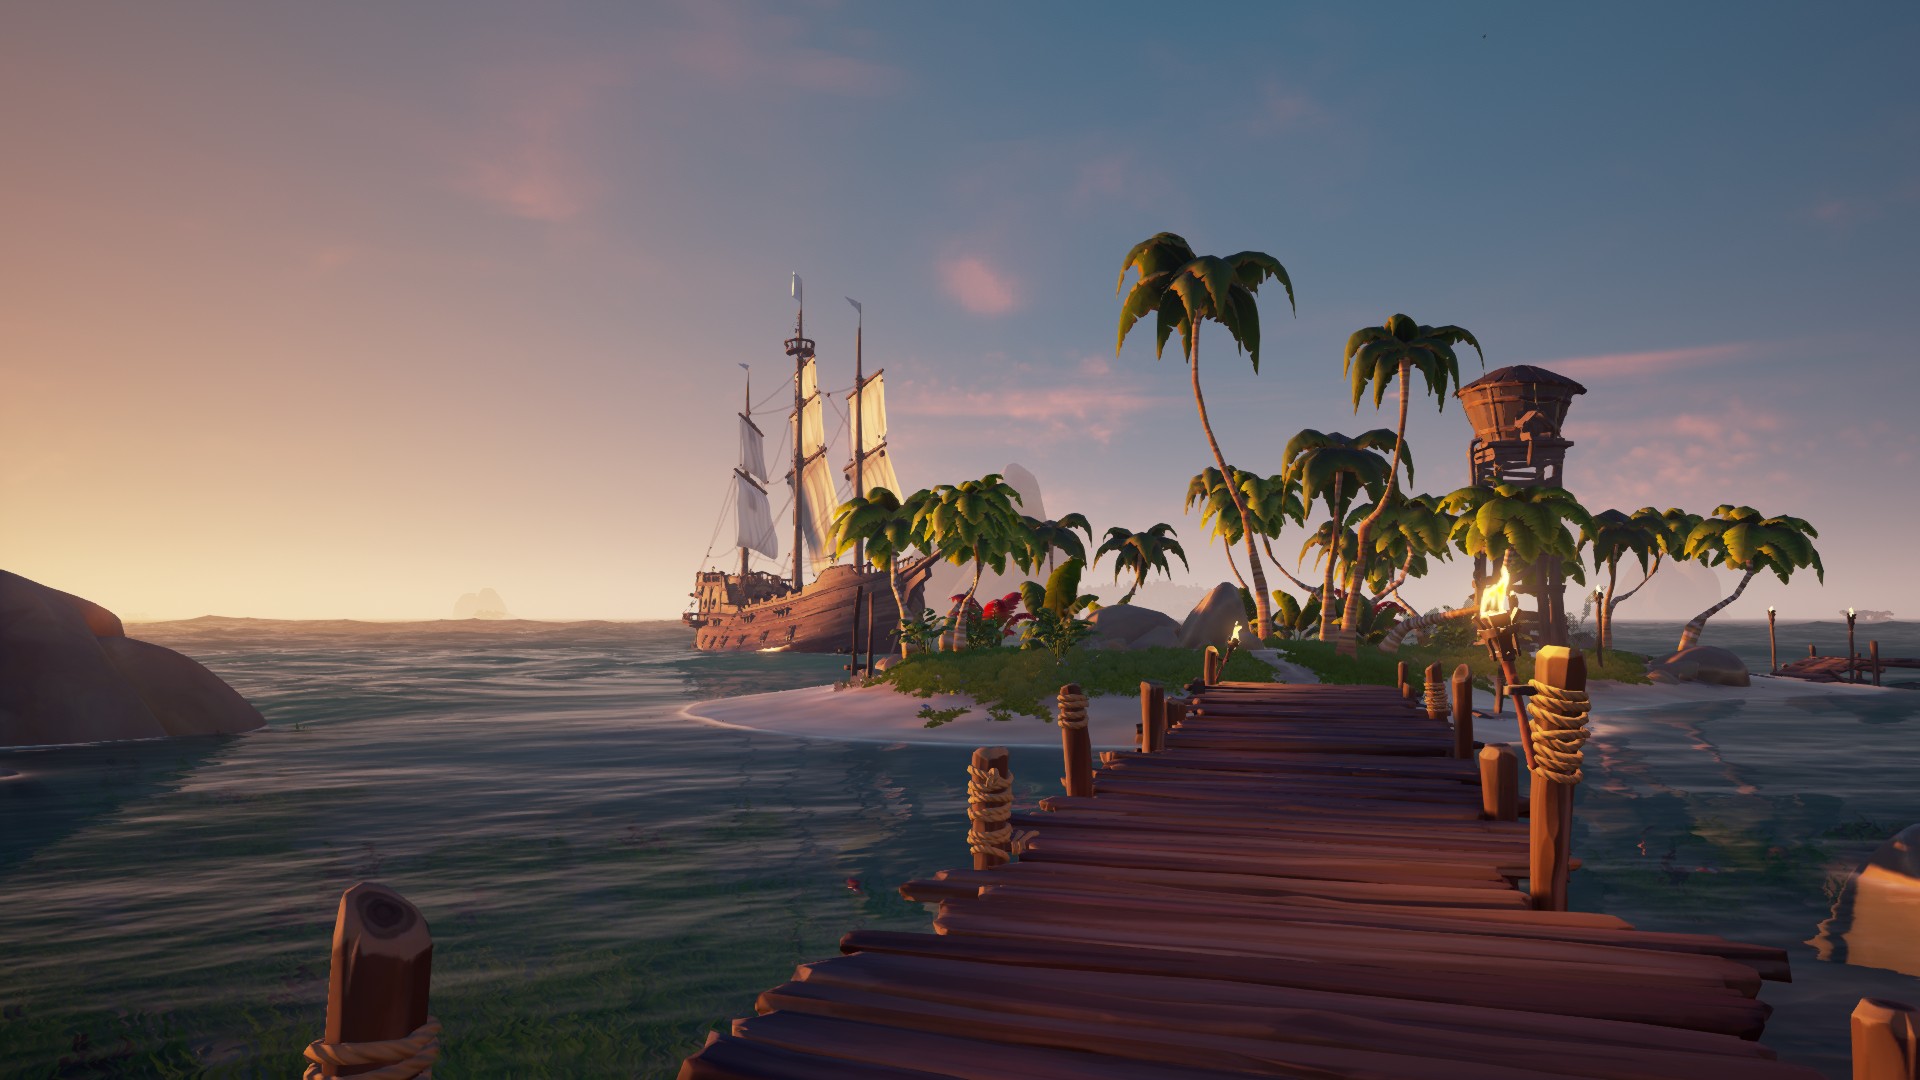 pirates, Sea of Thieves, Ship, Palm trees, Water, Rare studios, Sunset, Island, Sand, Video games Wallpaper